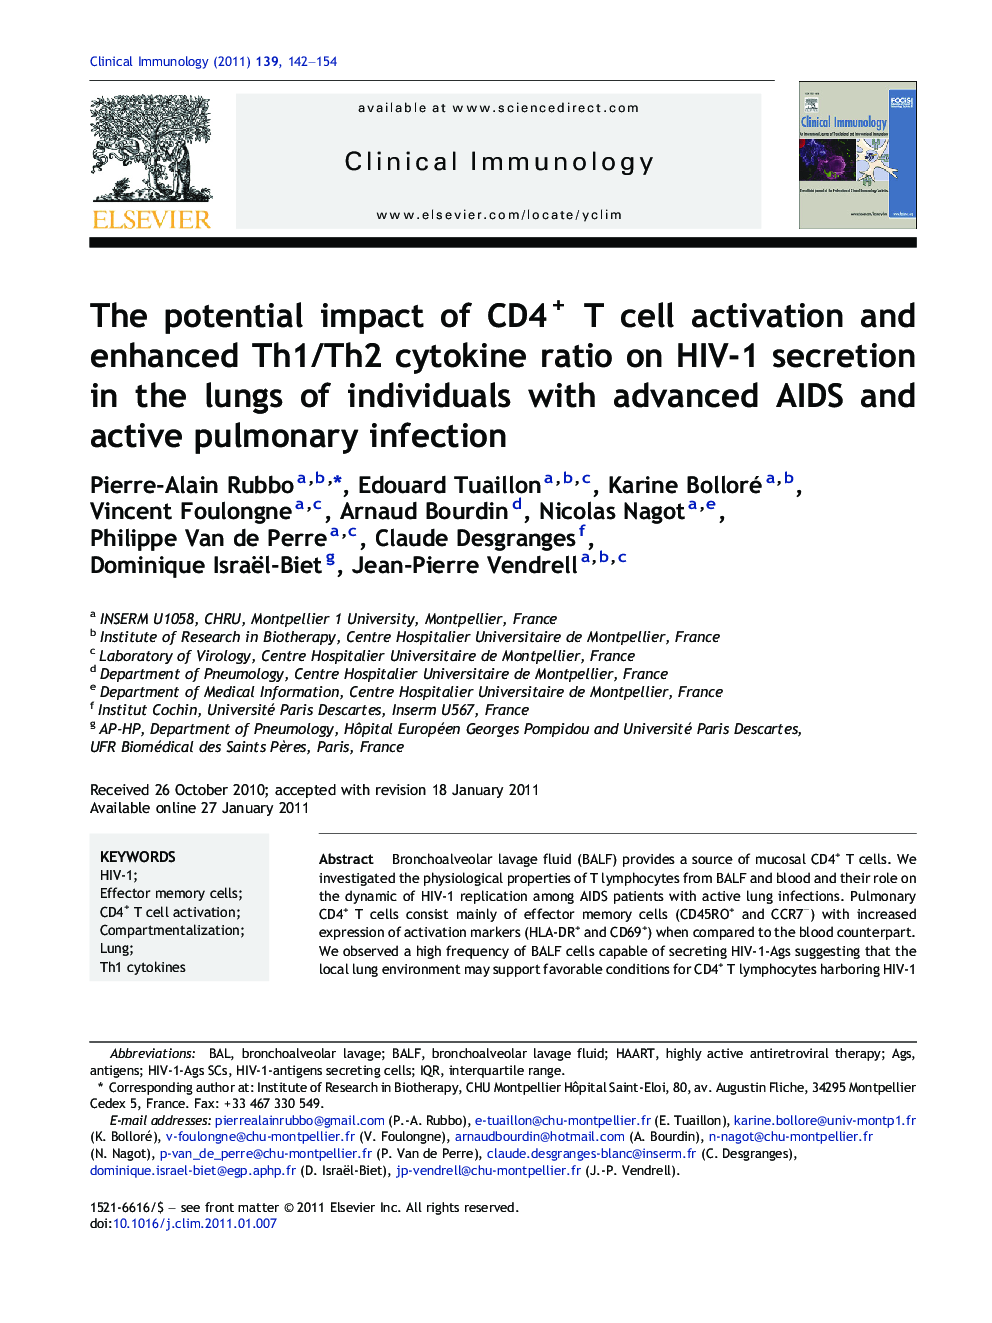 The potential impact of CD4+ T cell activation and enhanced Th1/Th2 cytokine ratio on HIV-1 secretion in the lungs of individuals with advanced AIDS and active pulmonary infection